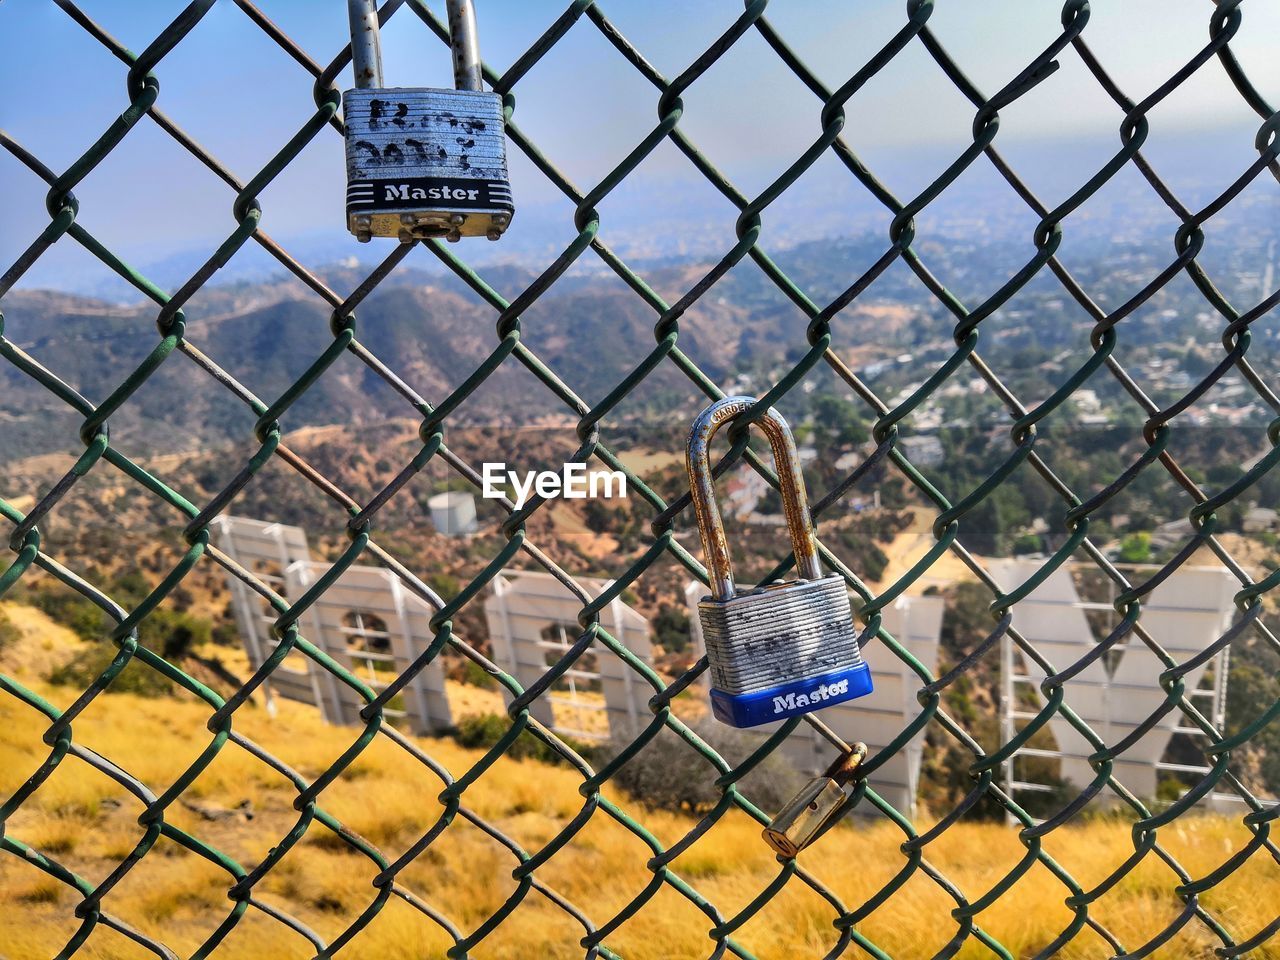 TEXT ON CHAINLINK FENCE WITH CHAIN